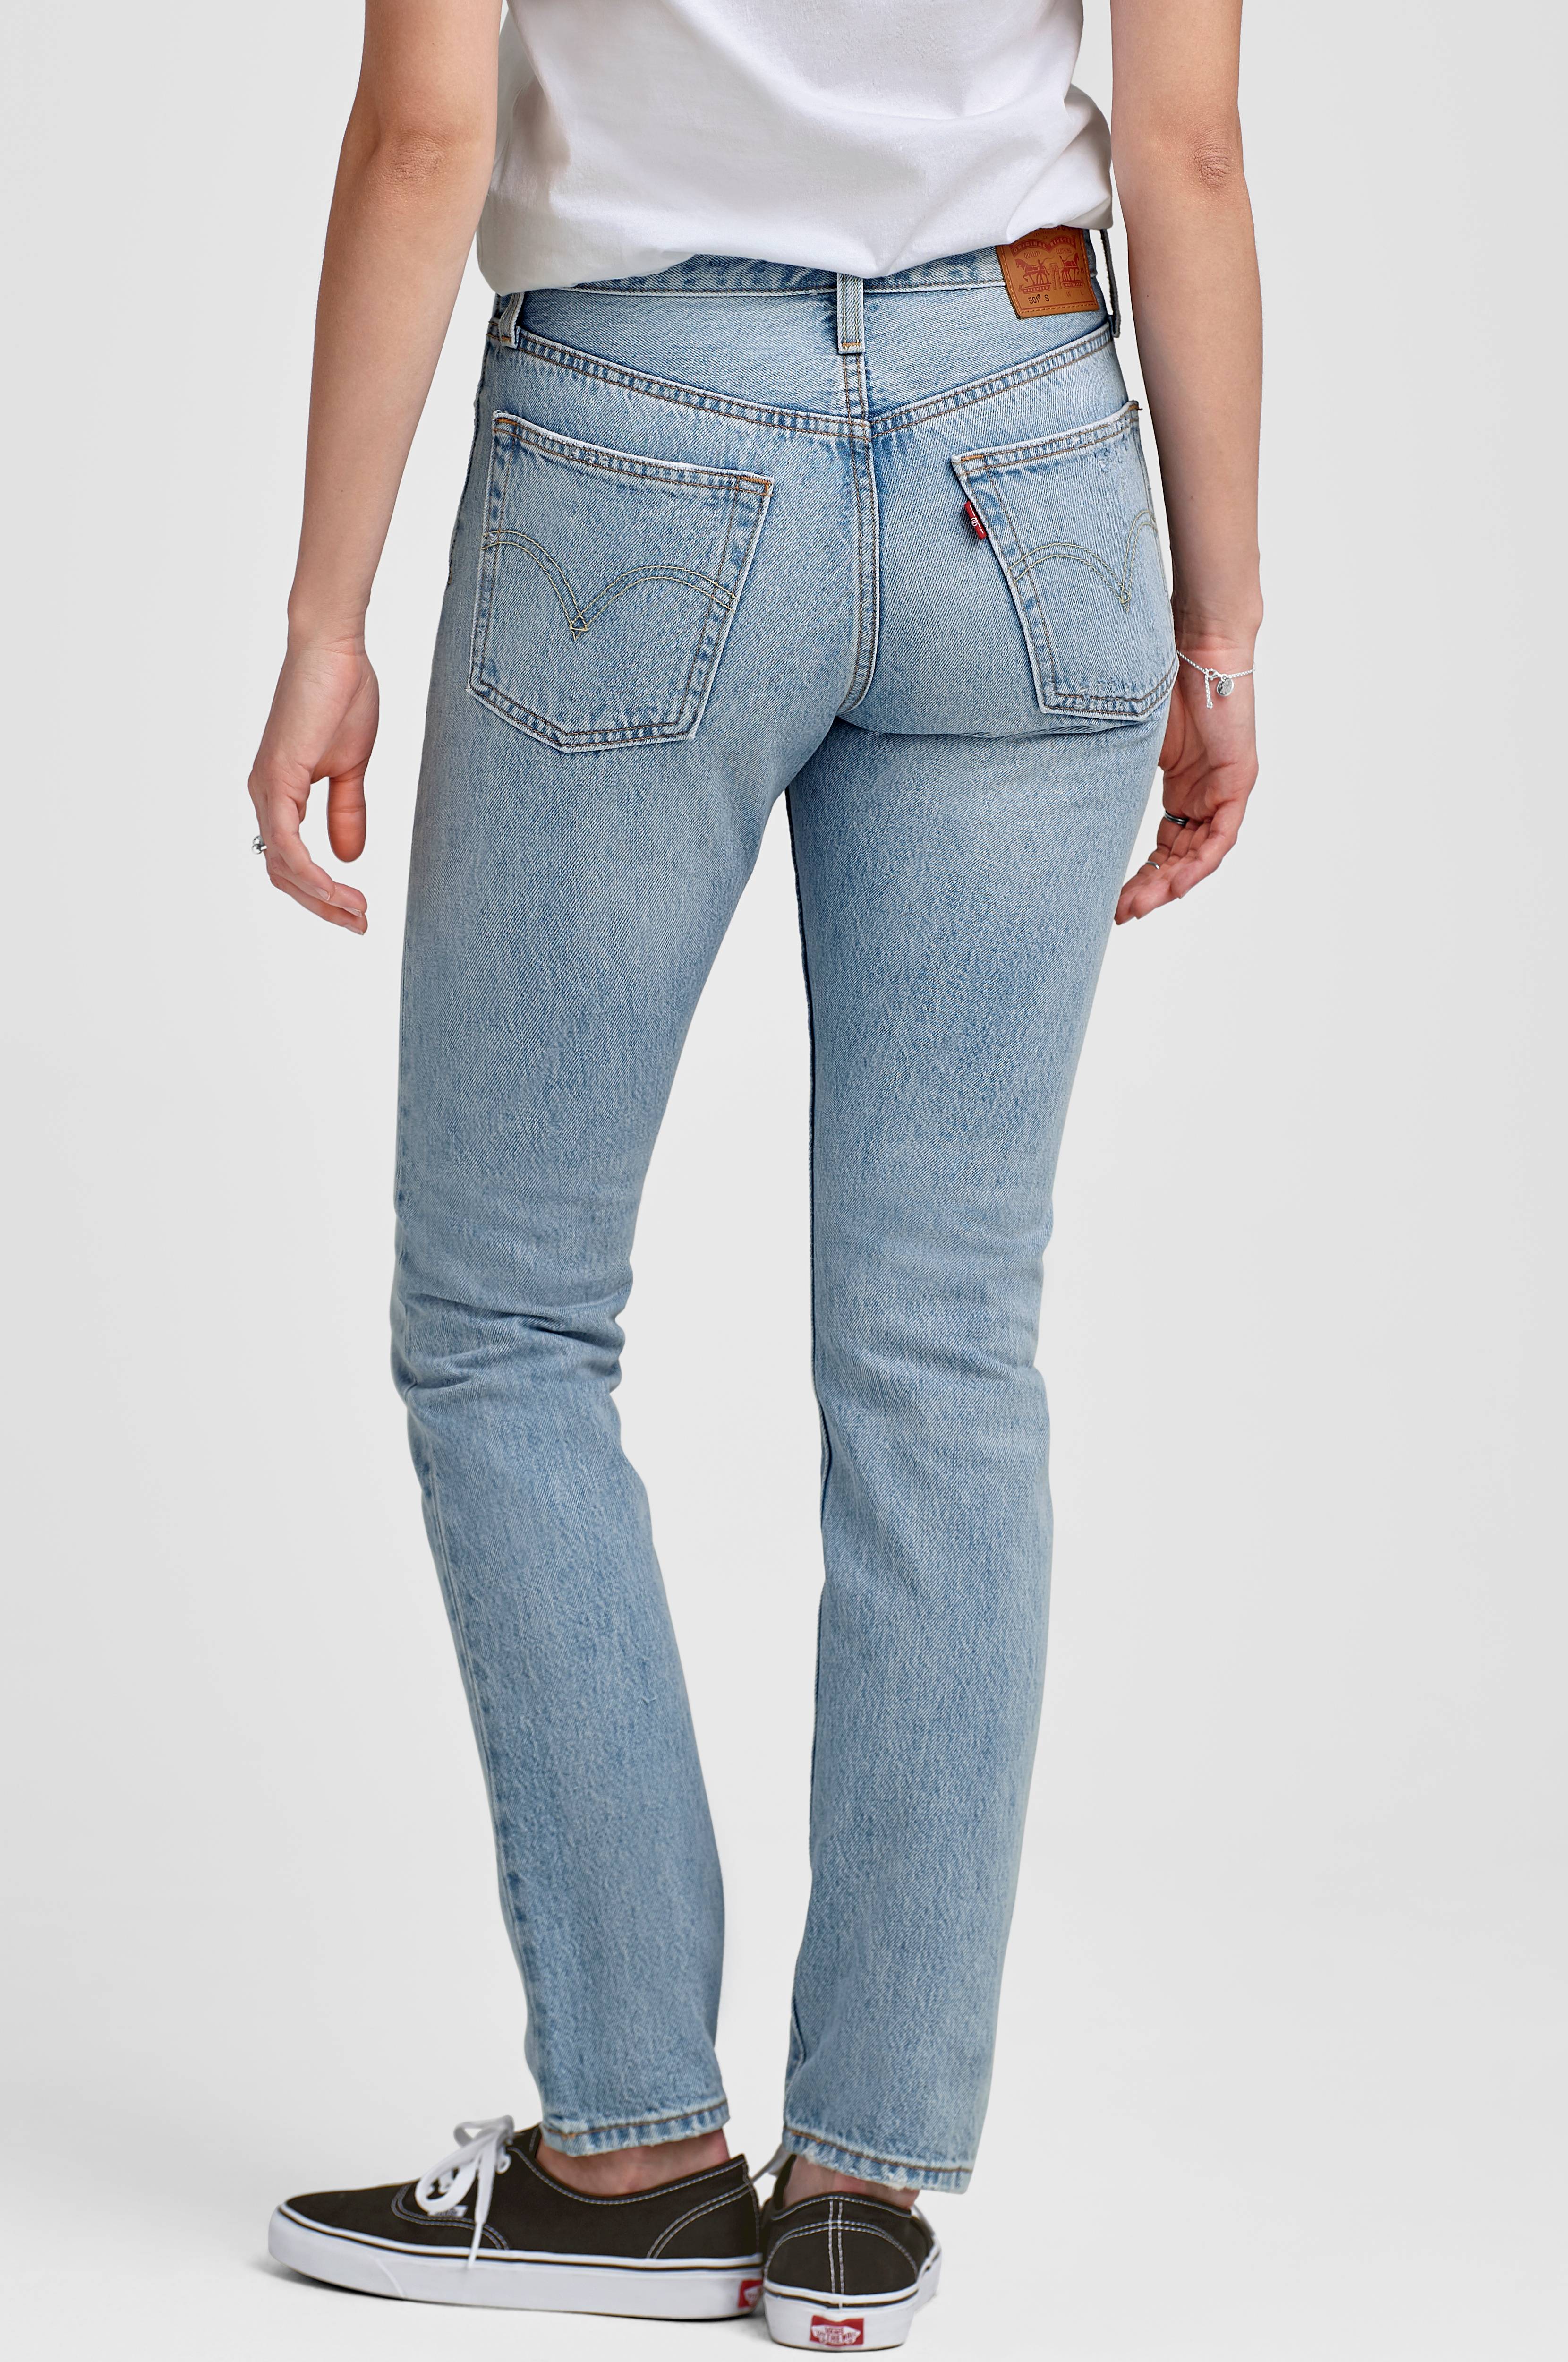 levis lovefool 501